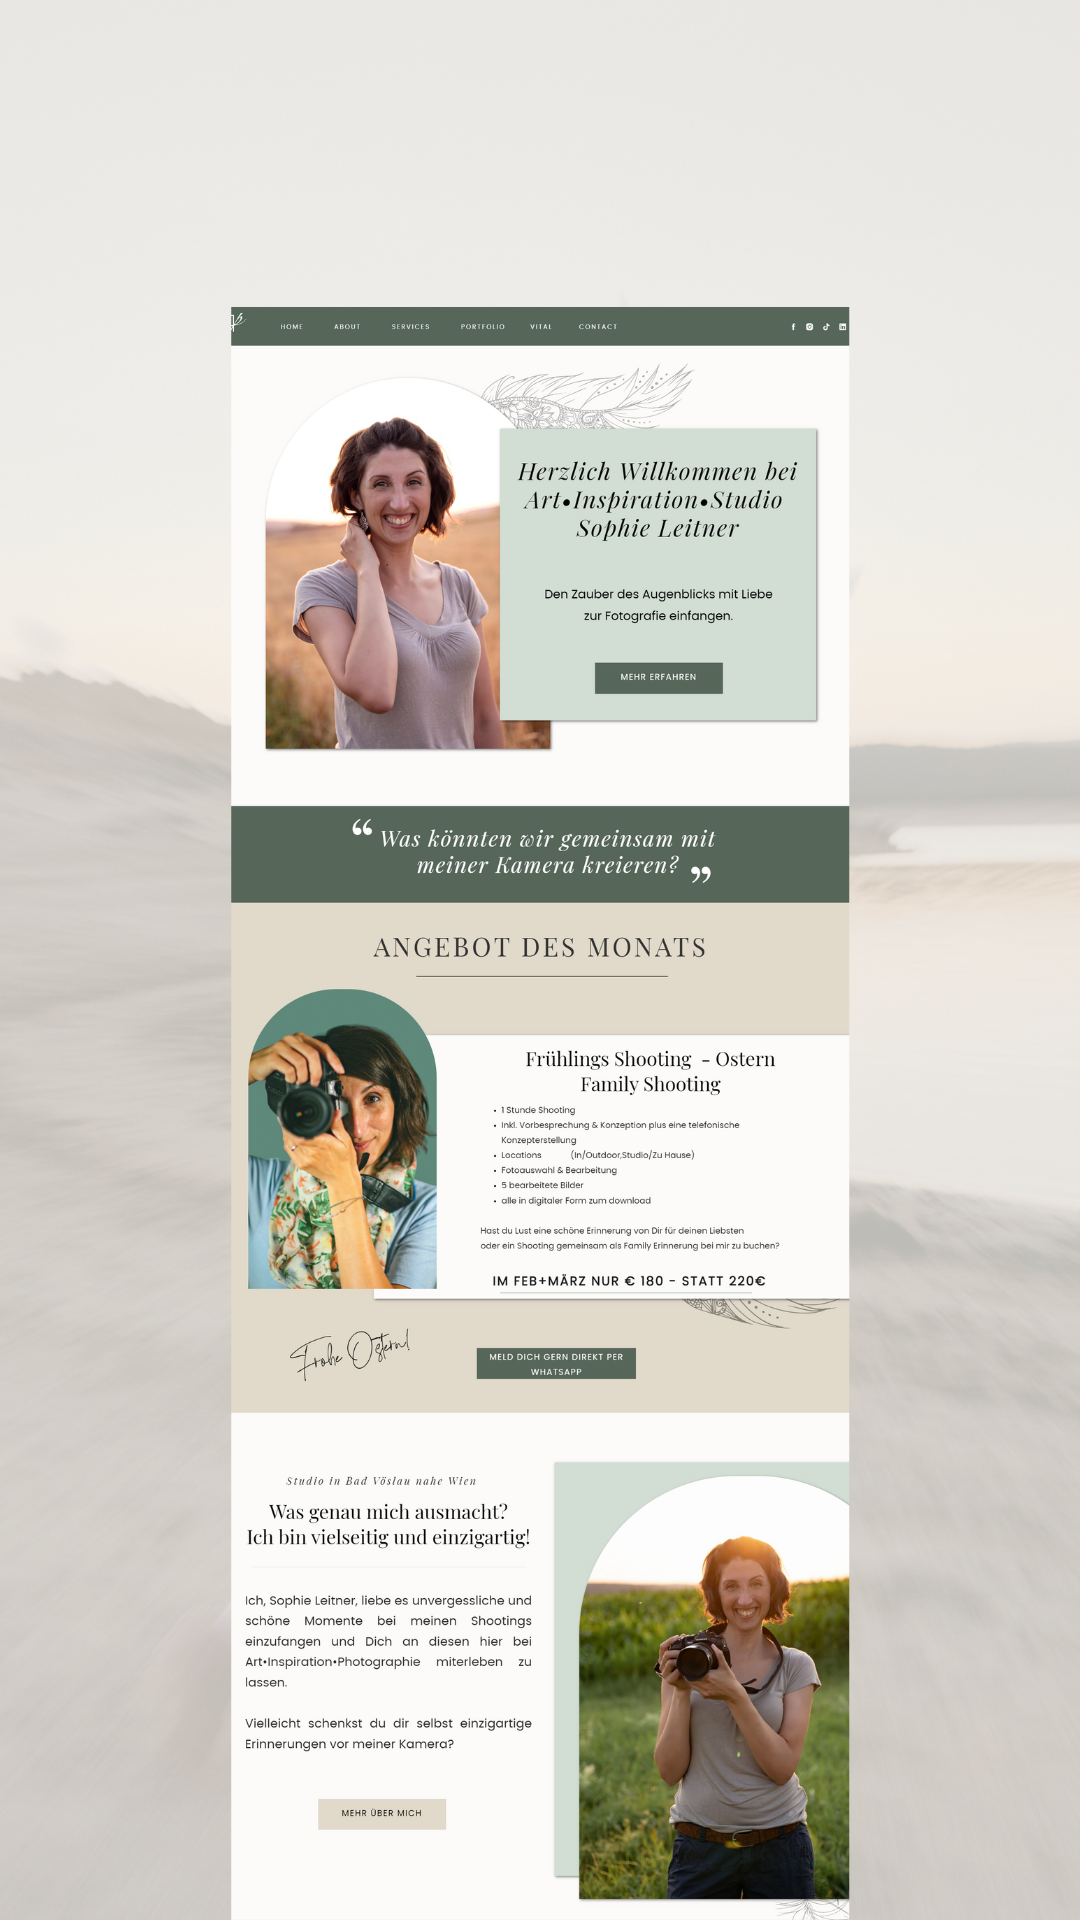 aesthetic design showit website templates for service providers 4